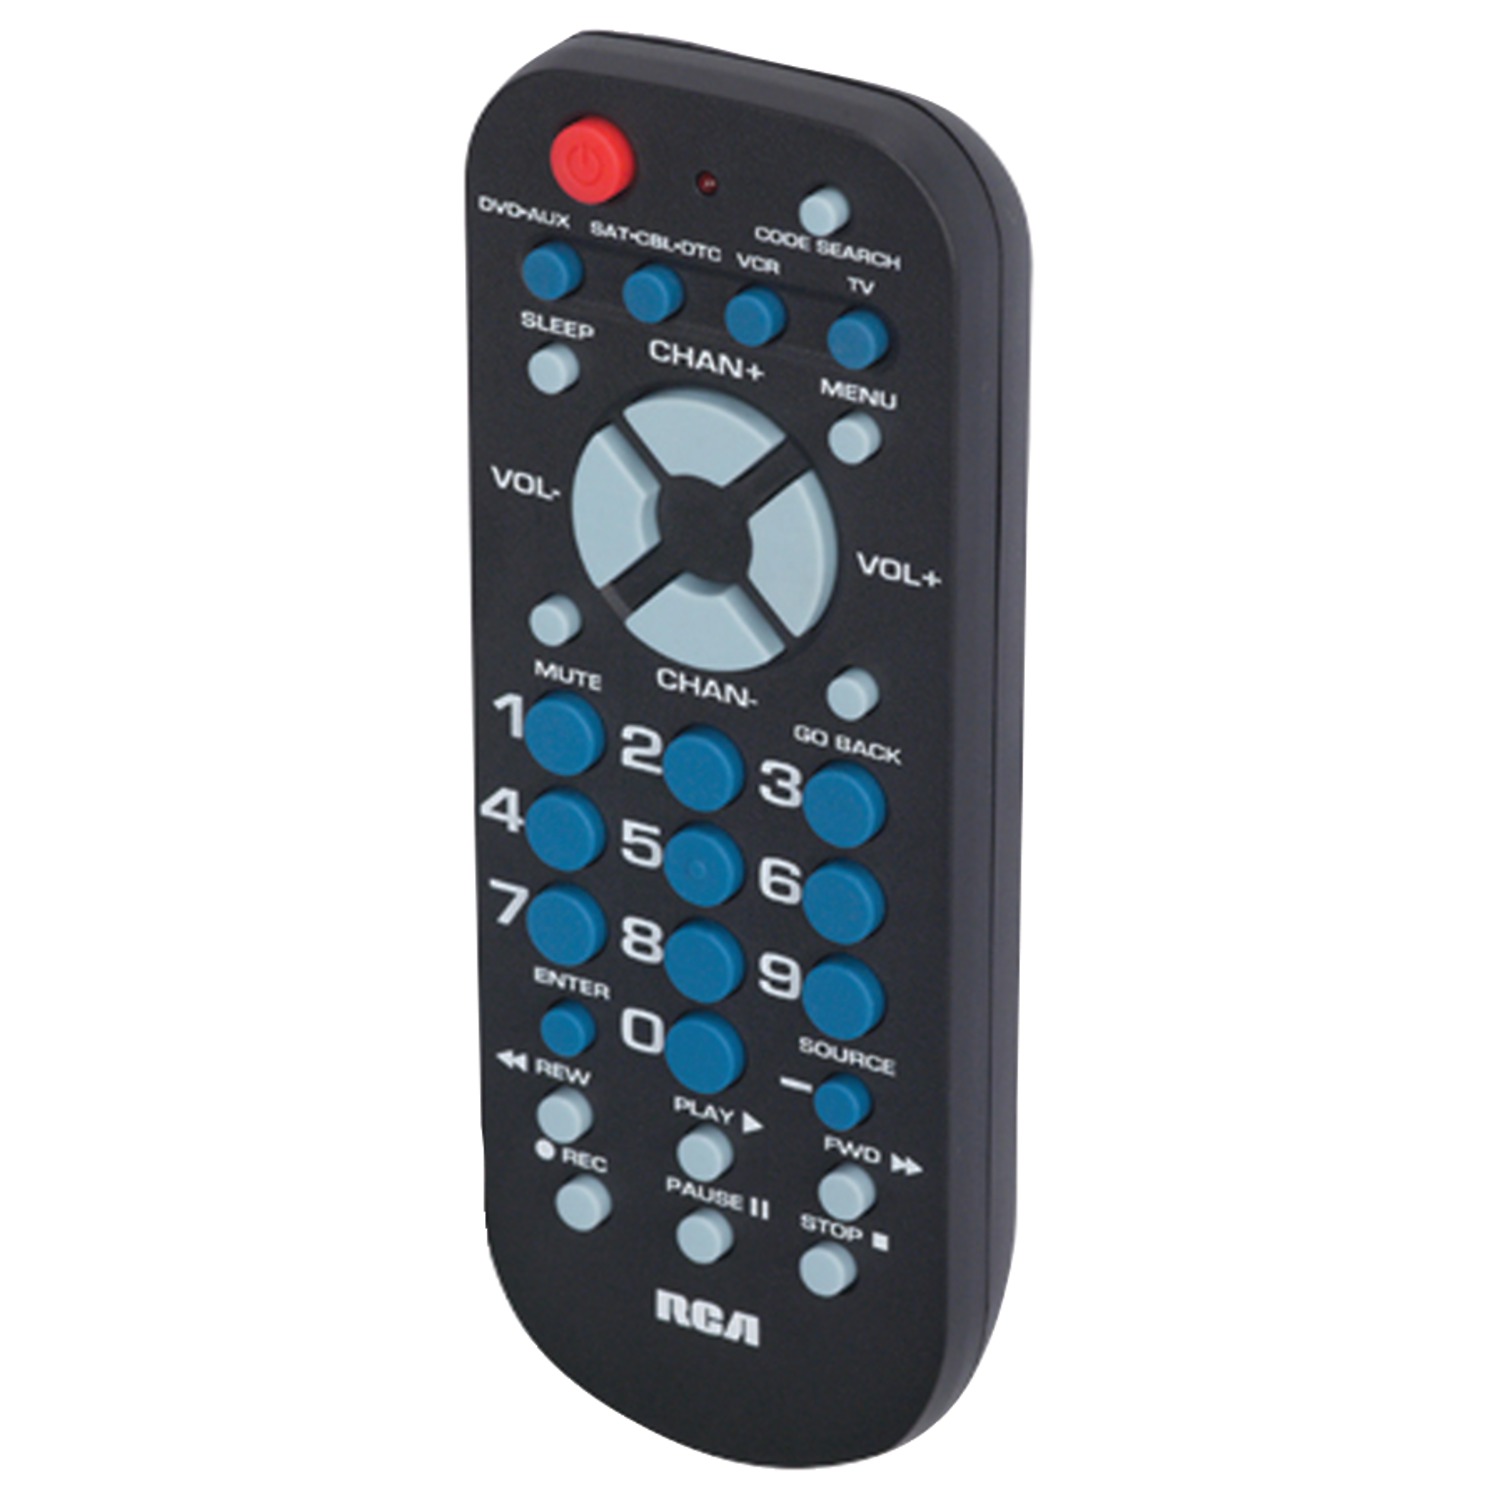 RCA Rcr504be 4-device Palm-sized Universal Remote - image 2 of 3